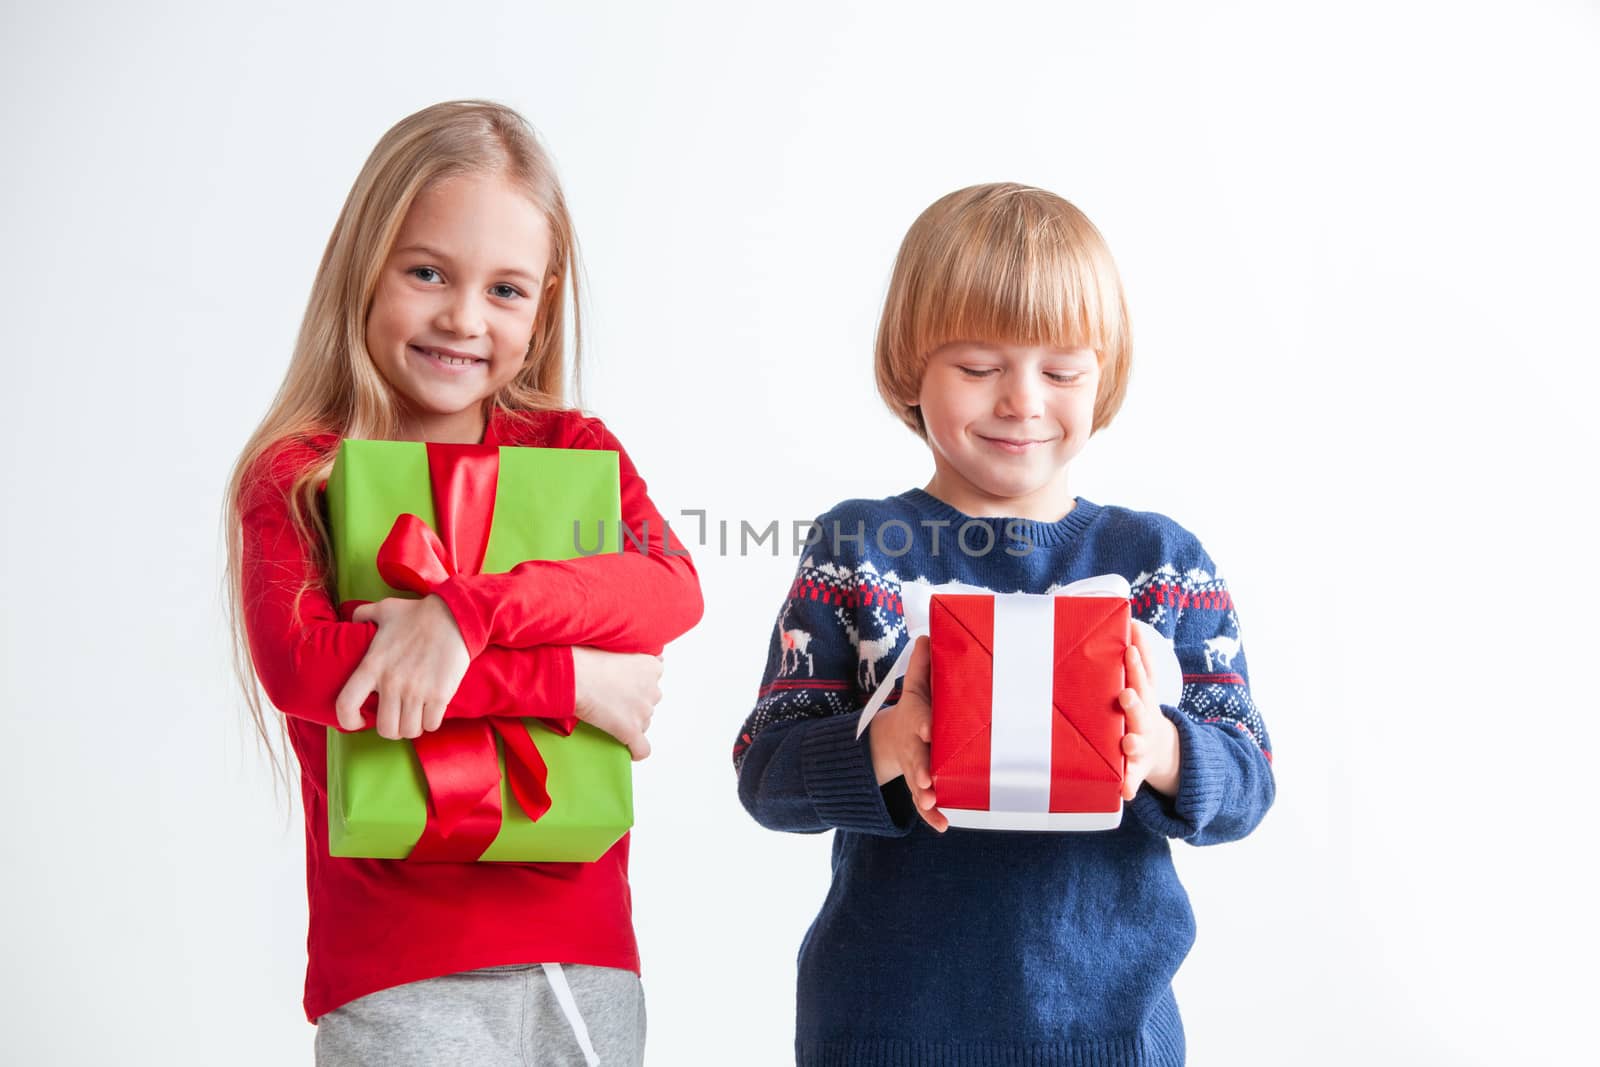 Portrait of two happy children with Christmas gift boxes on white background